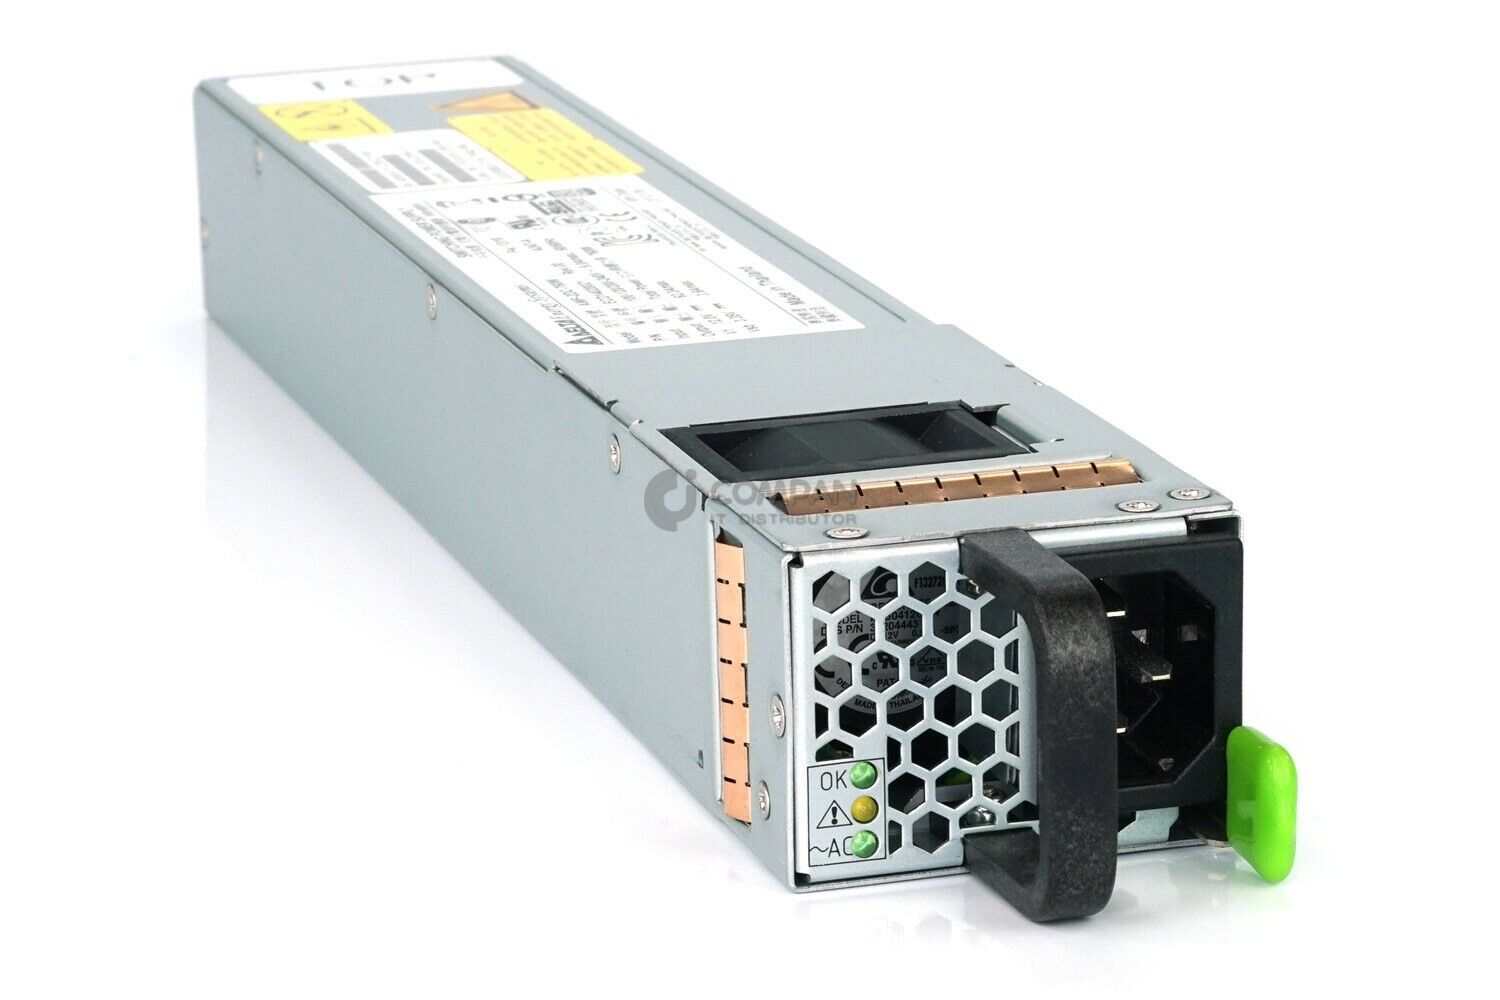 300-2299-01 SUN ORACLE  760W AC POWER SUPPLY FOR DATACENTER